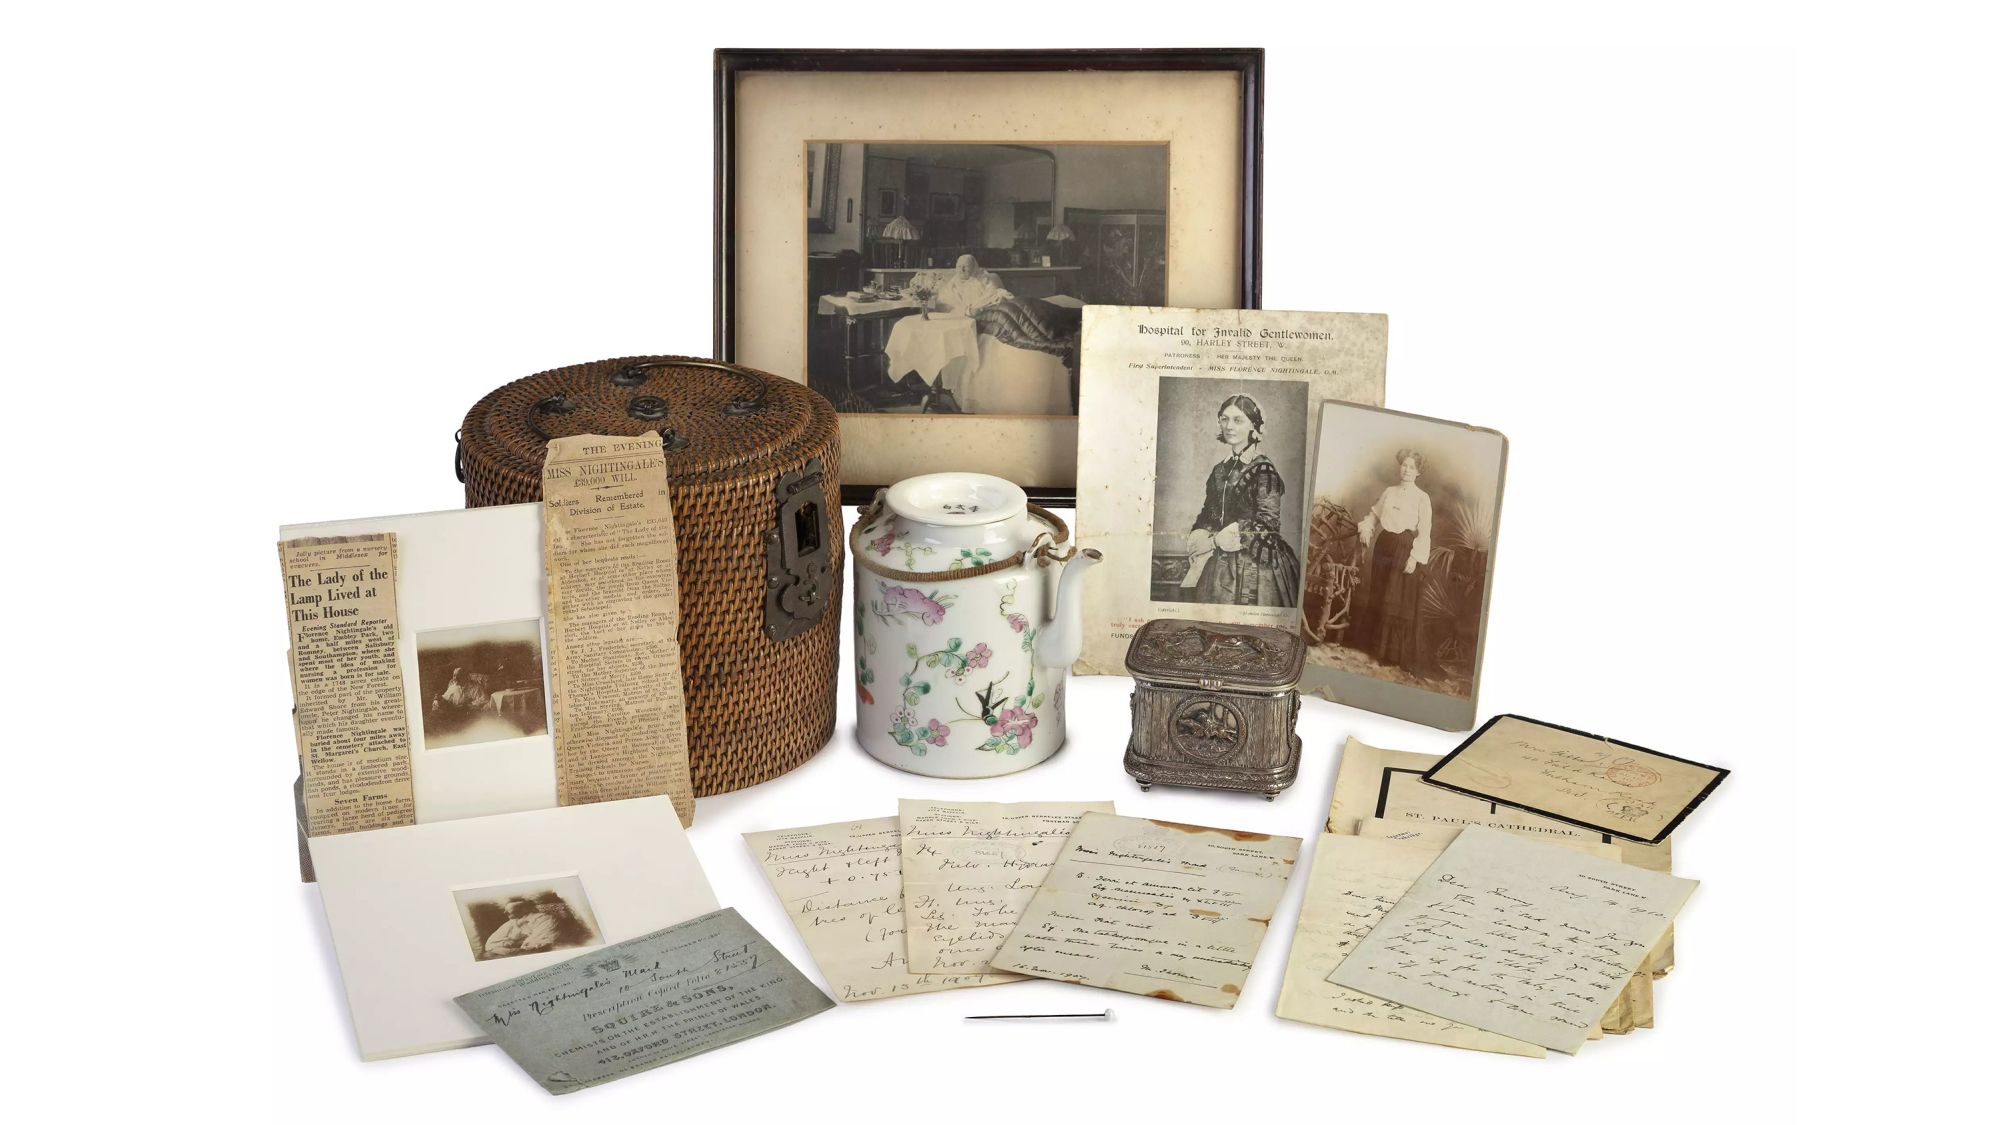 The collection of items related to Florence Nightingale is going on sale in London.